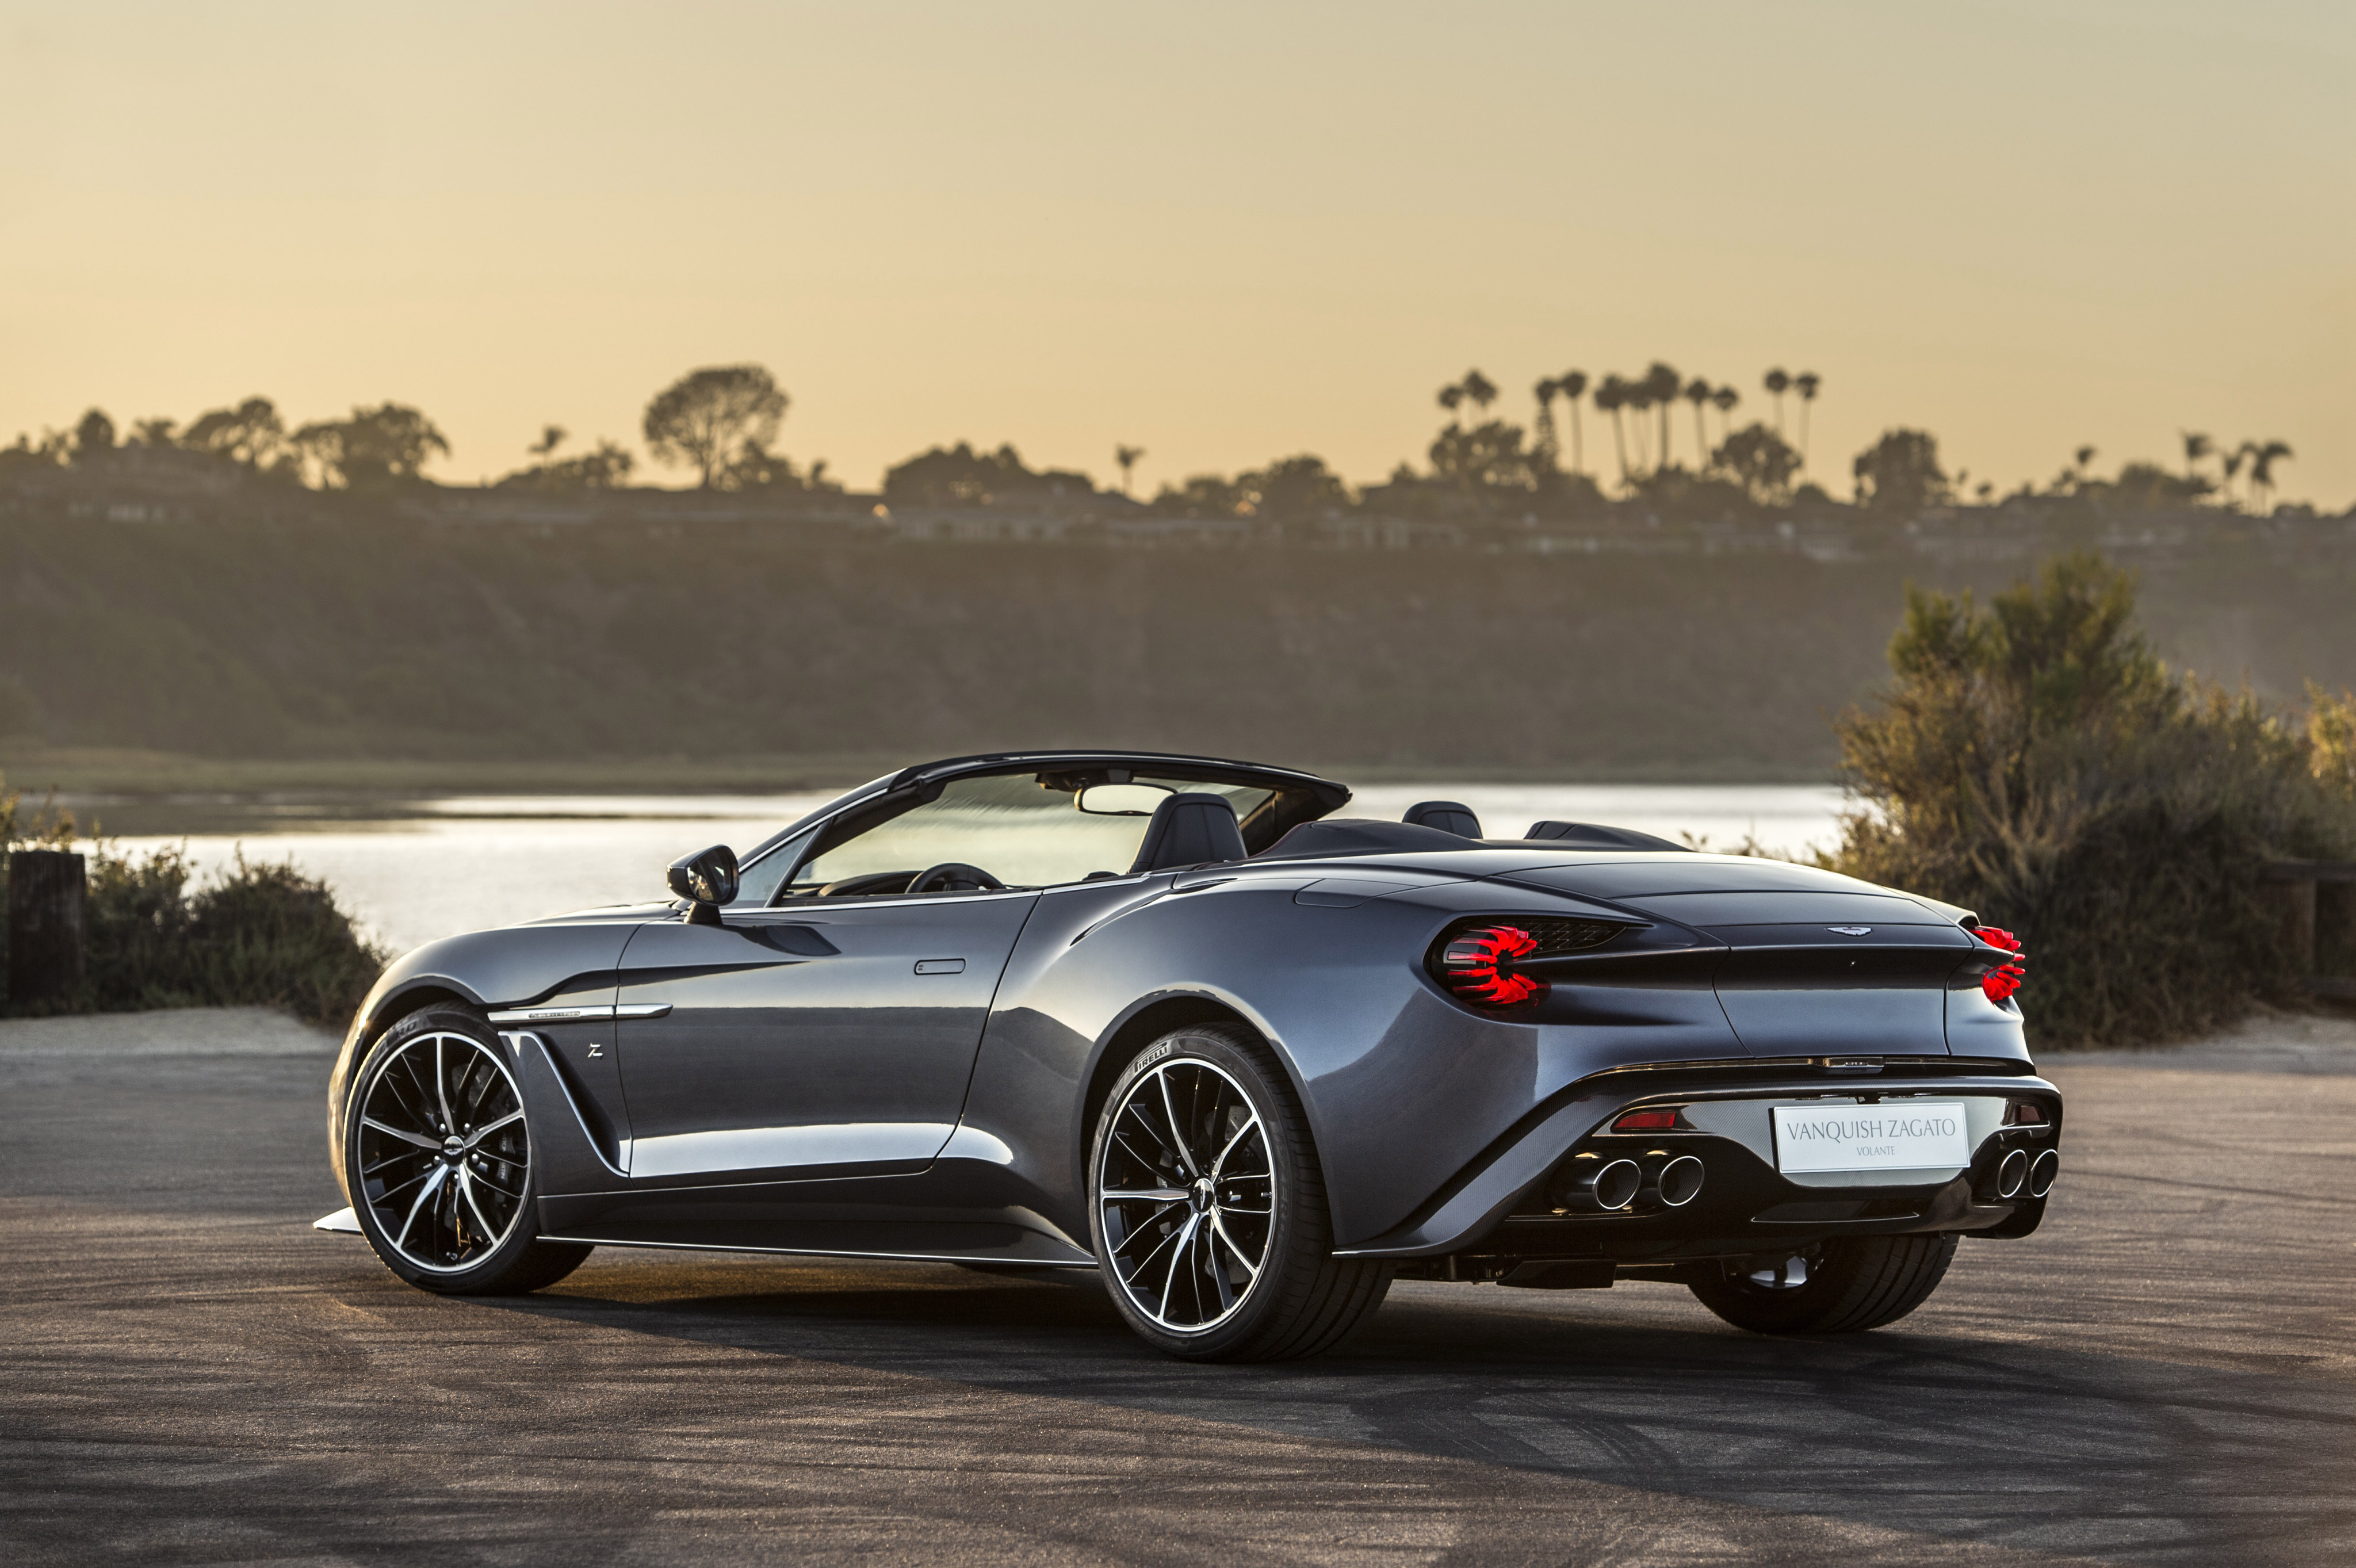 Picture of a gray Aston Martin Vanquish rear view.